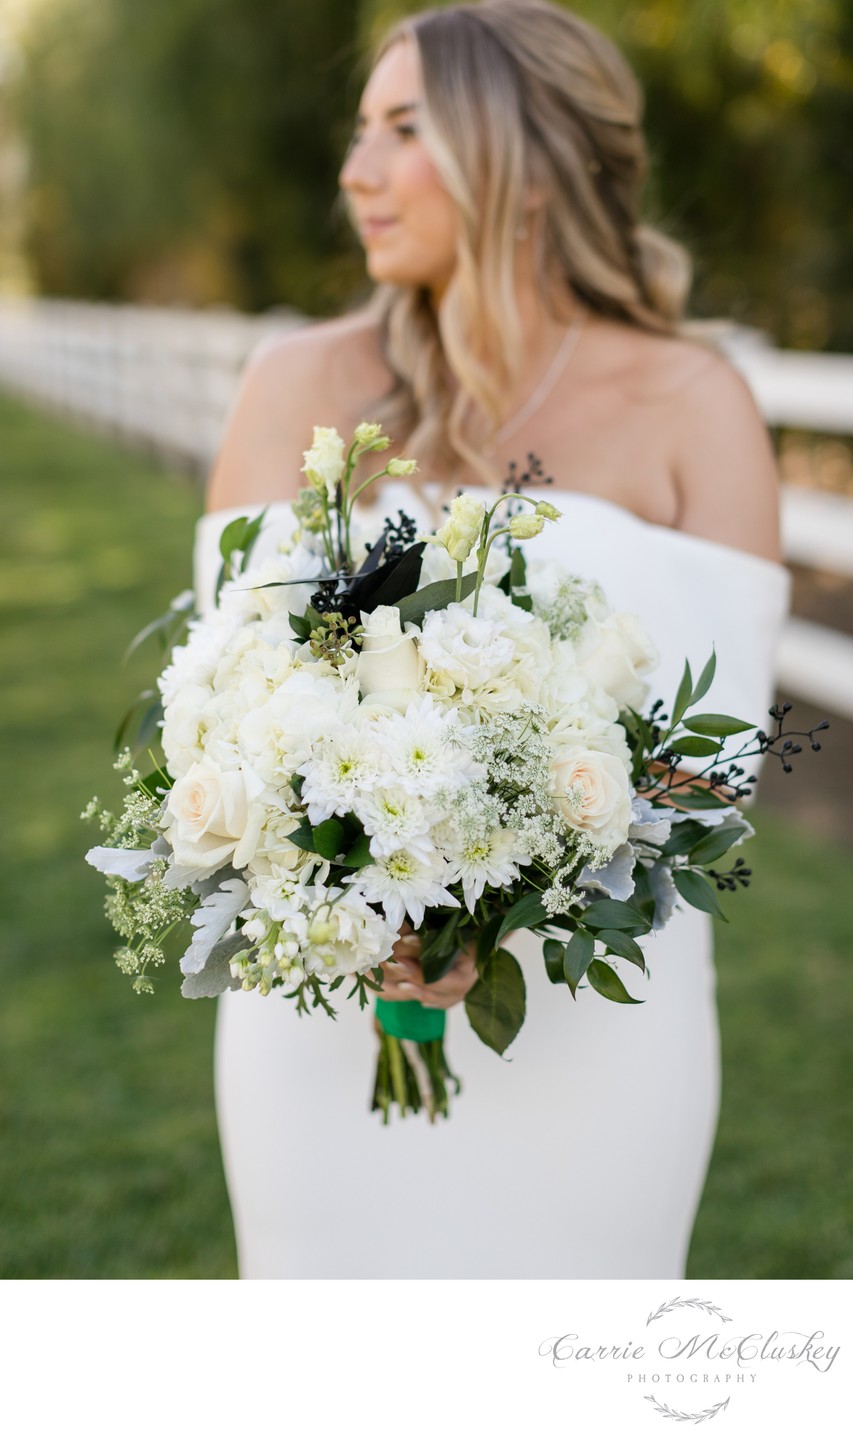 Bride with white bouquet at Rancho Guejito Vineyards.